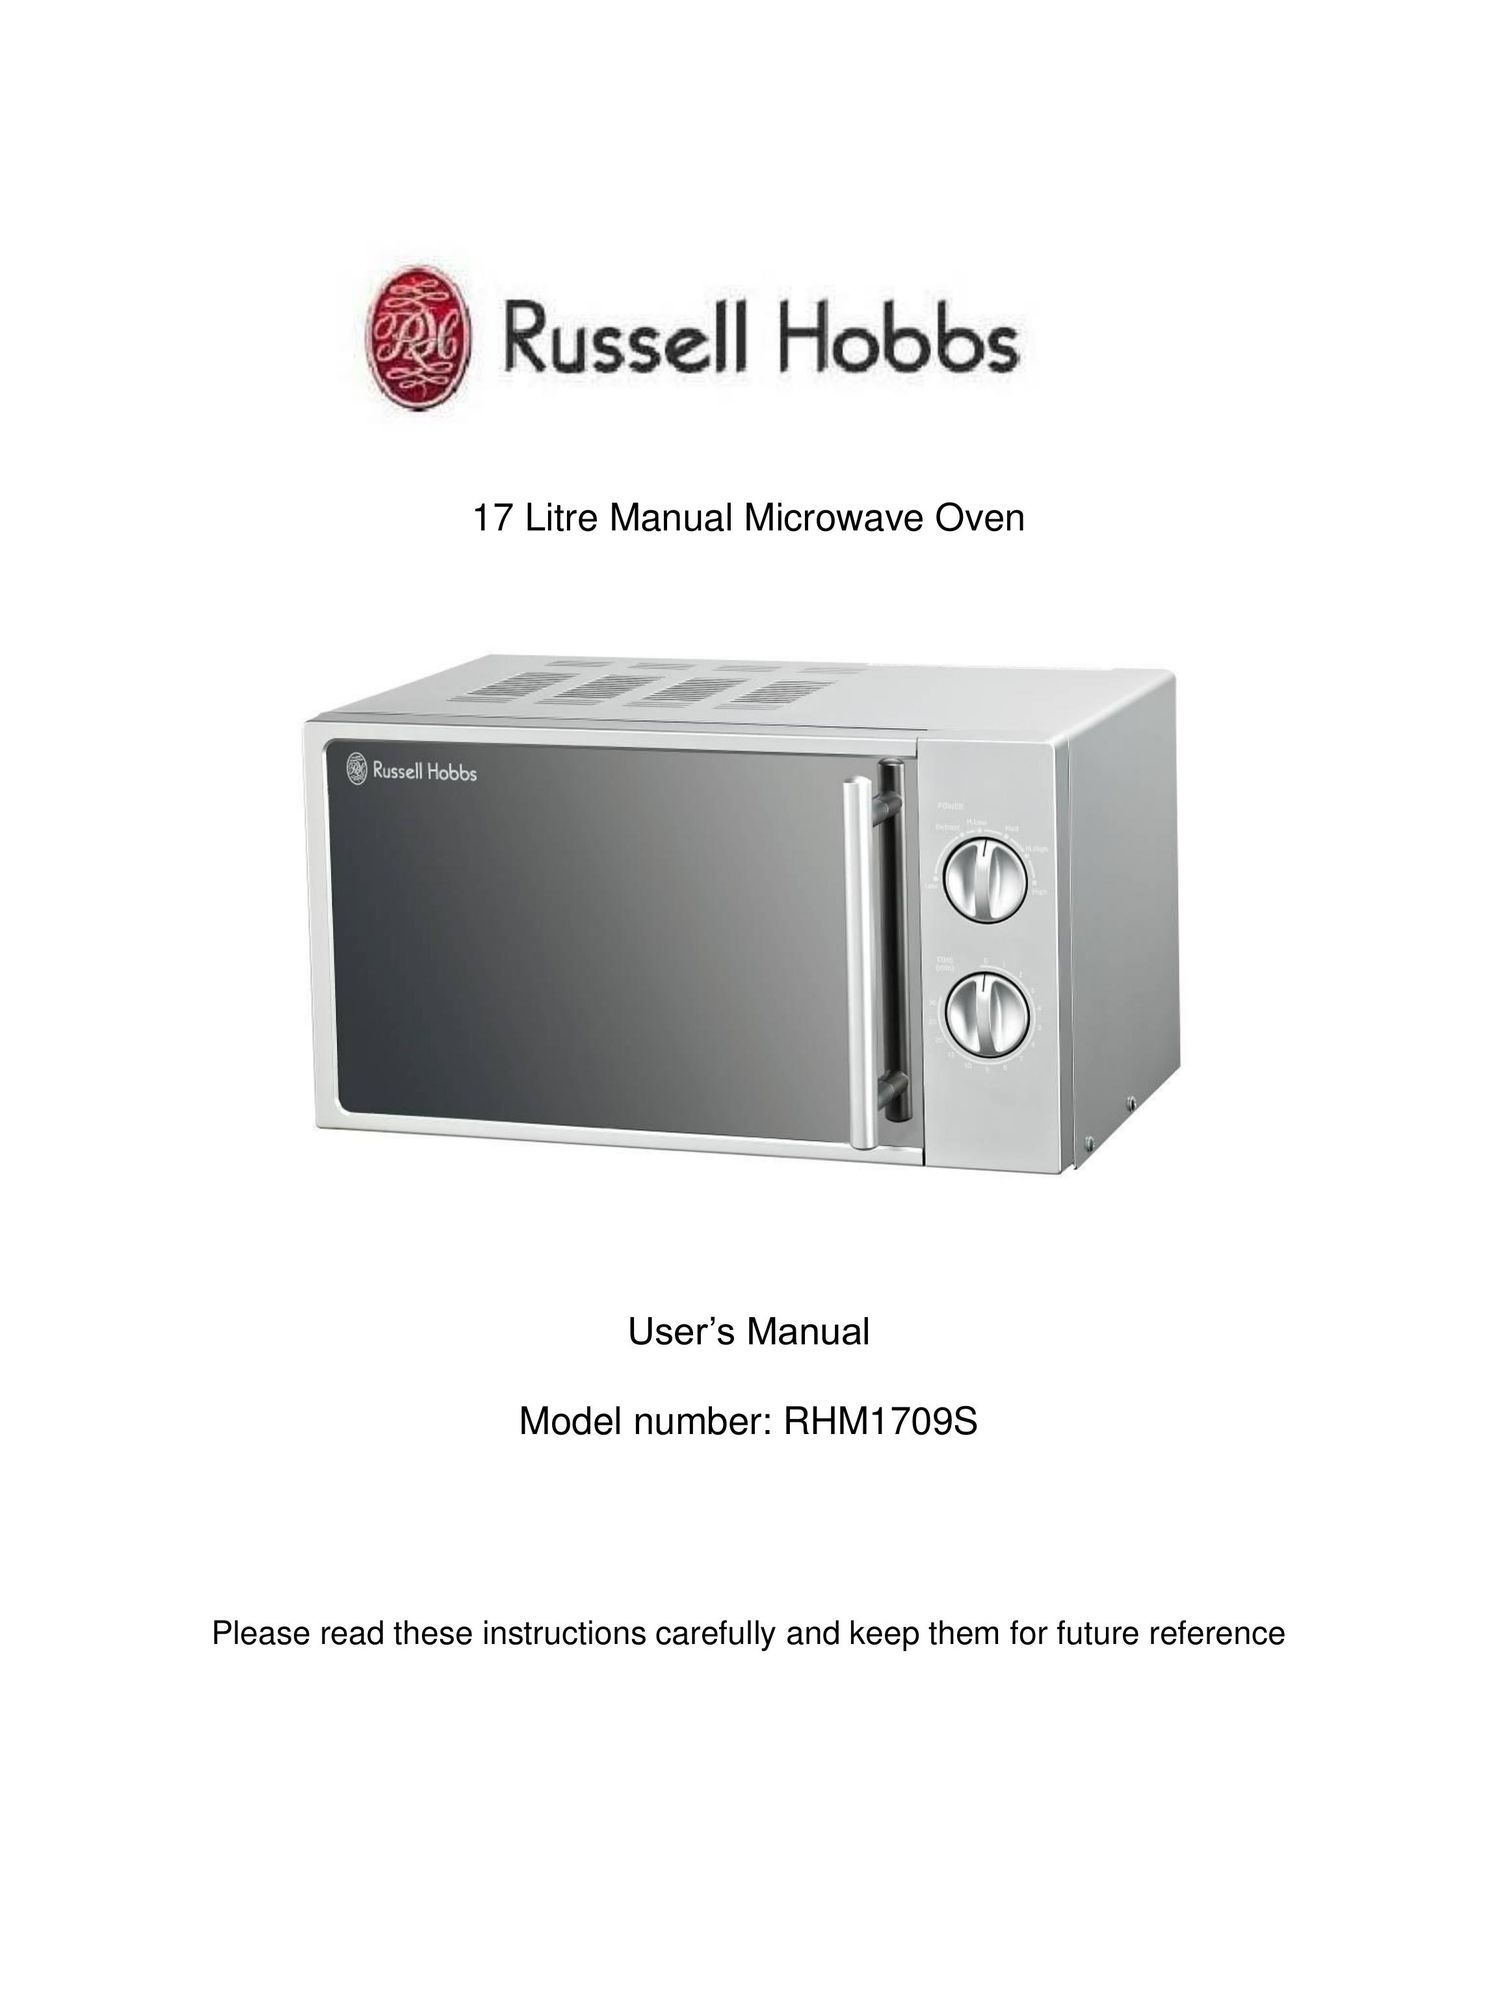 Russell Hobbs RHM1709S Microwave Oven User Manual